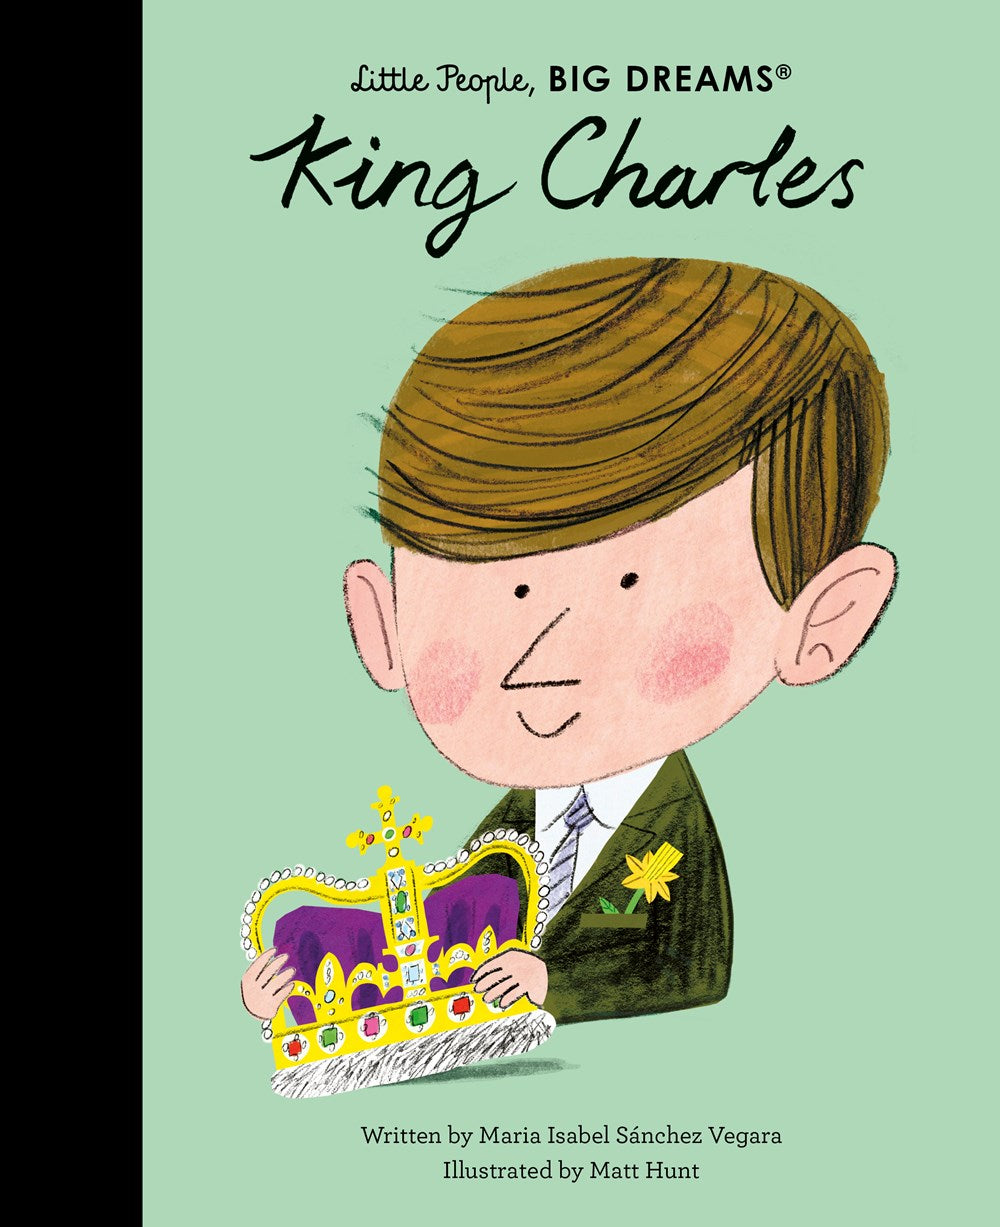 The King Charles-Little People Big Dreams Book makes a lovely gift